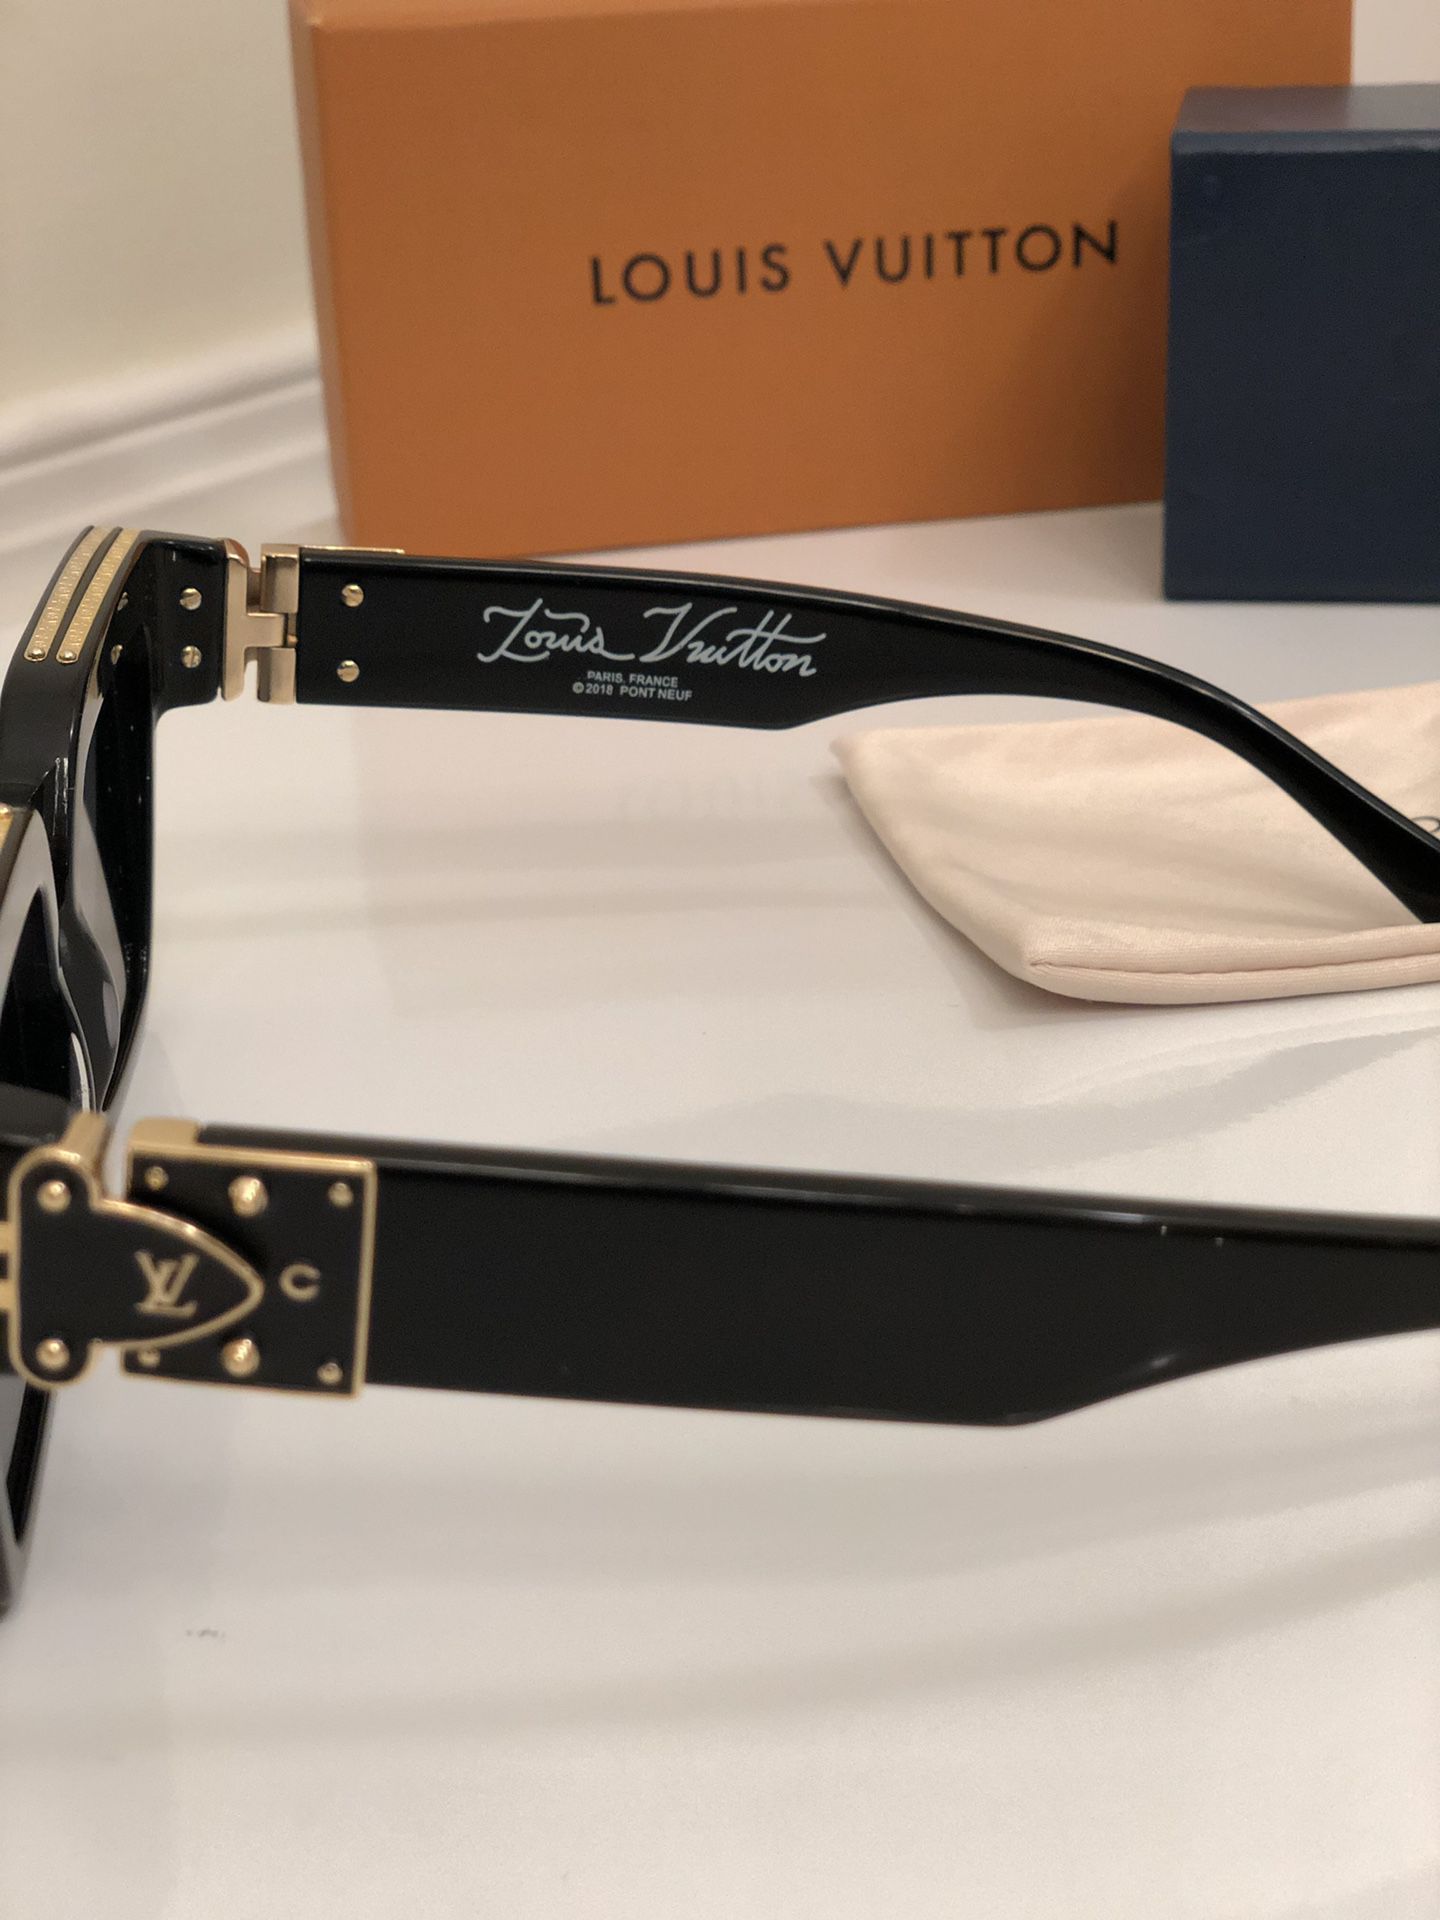 Lv sunglasses millionaire for Sale in Copley, OH - OfferUp